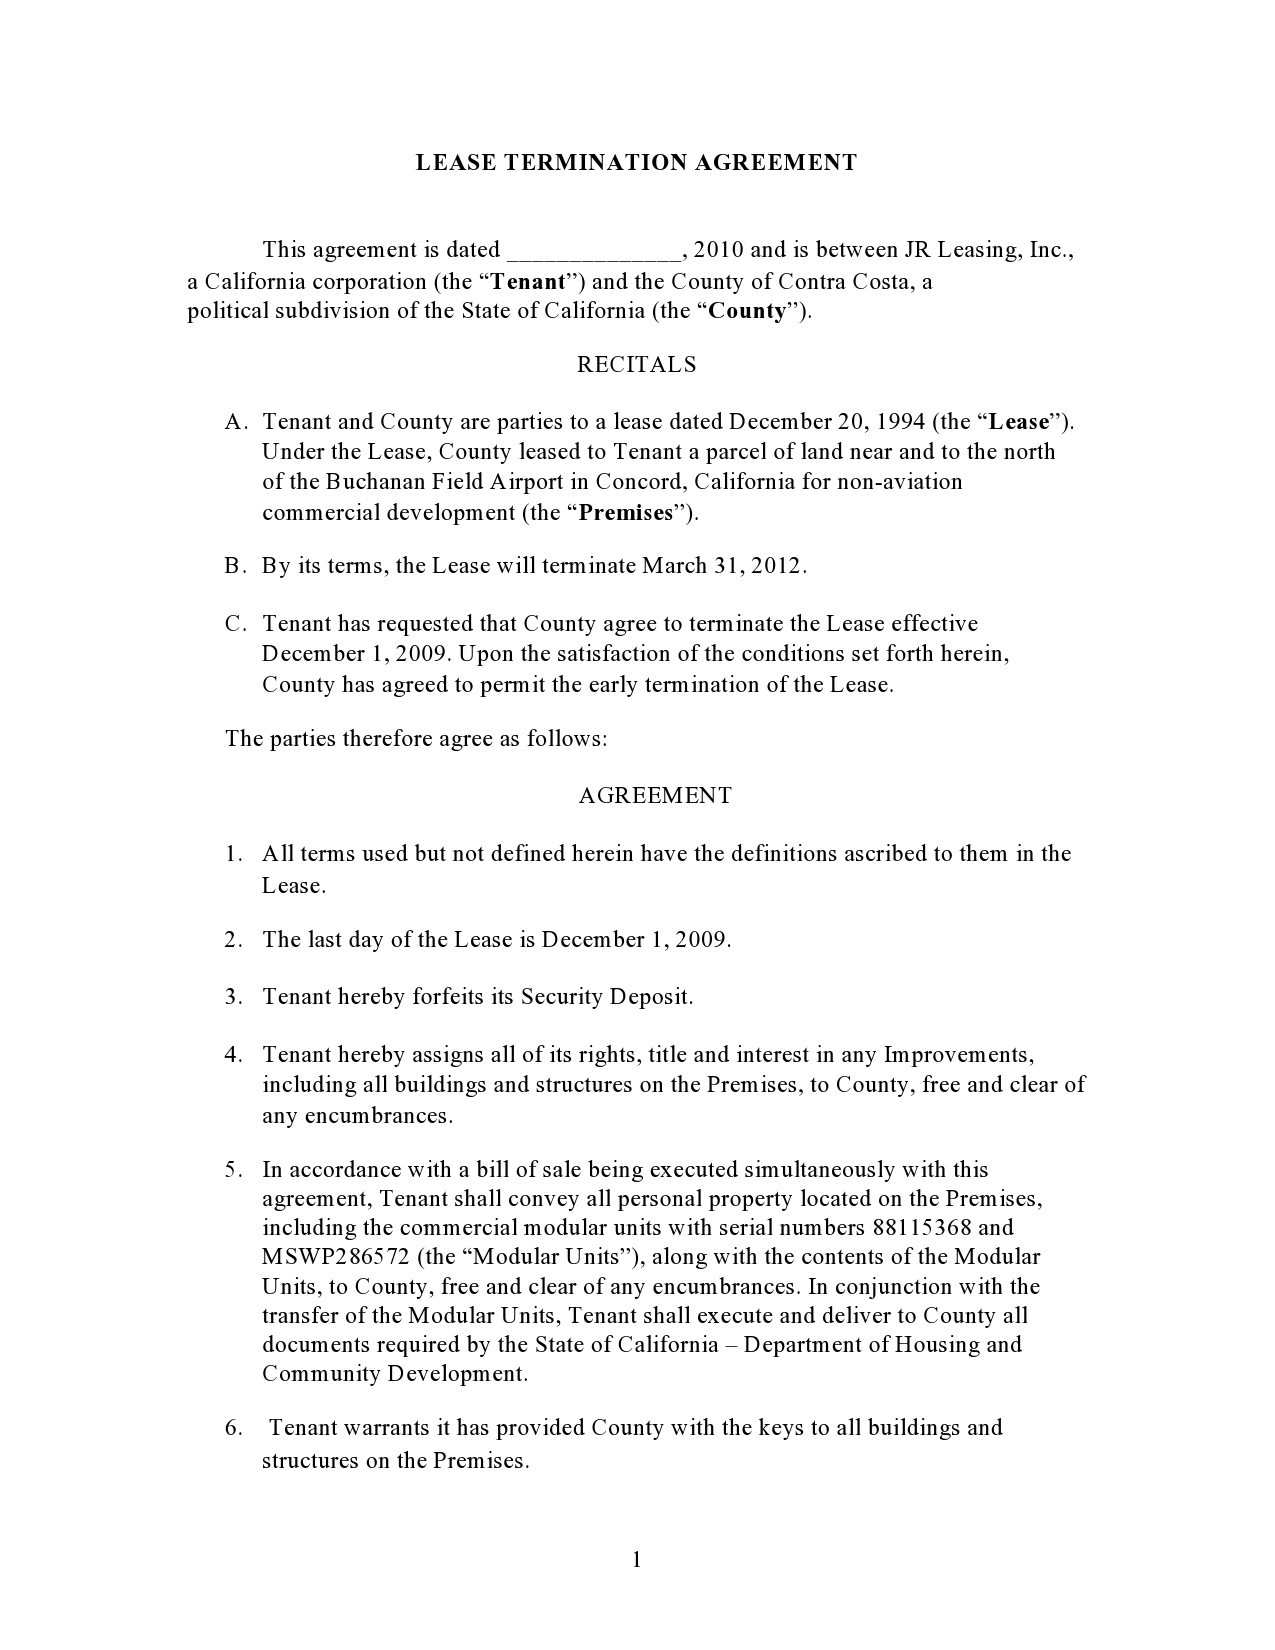 Free lease termination agreement 29